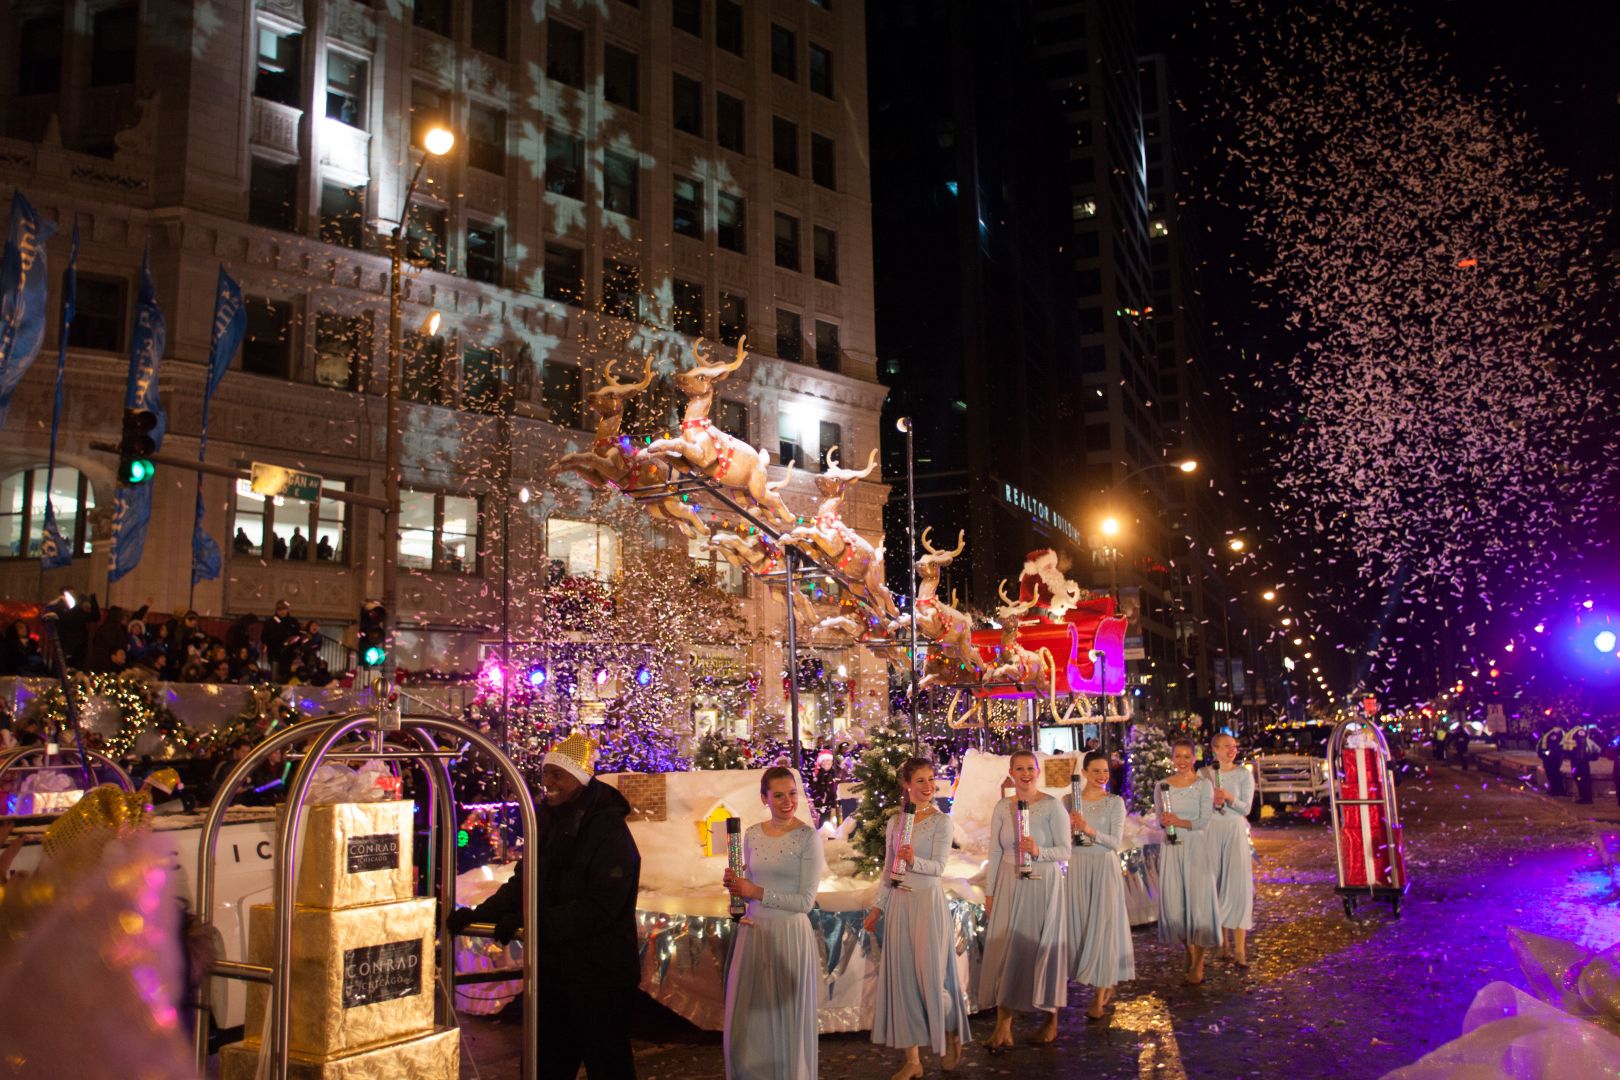 This is an image of the Magnificent Mile Lights Festival